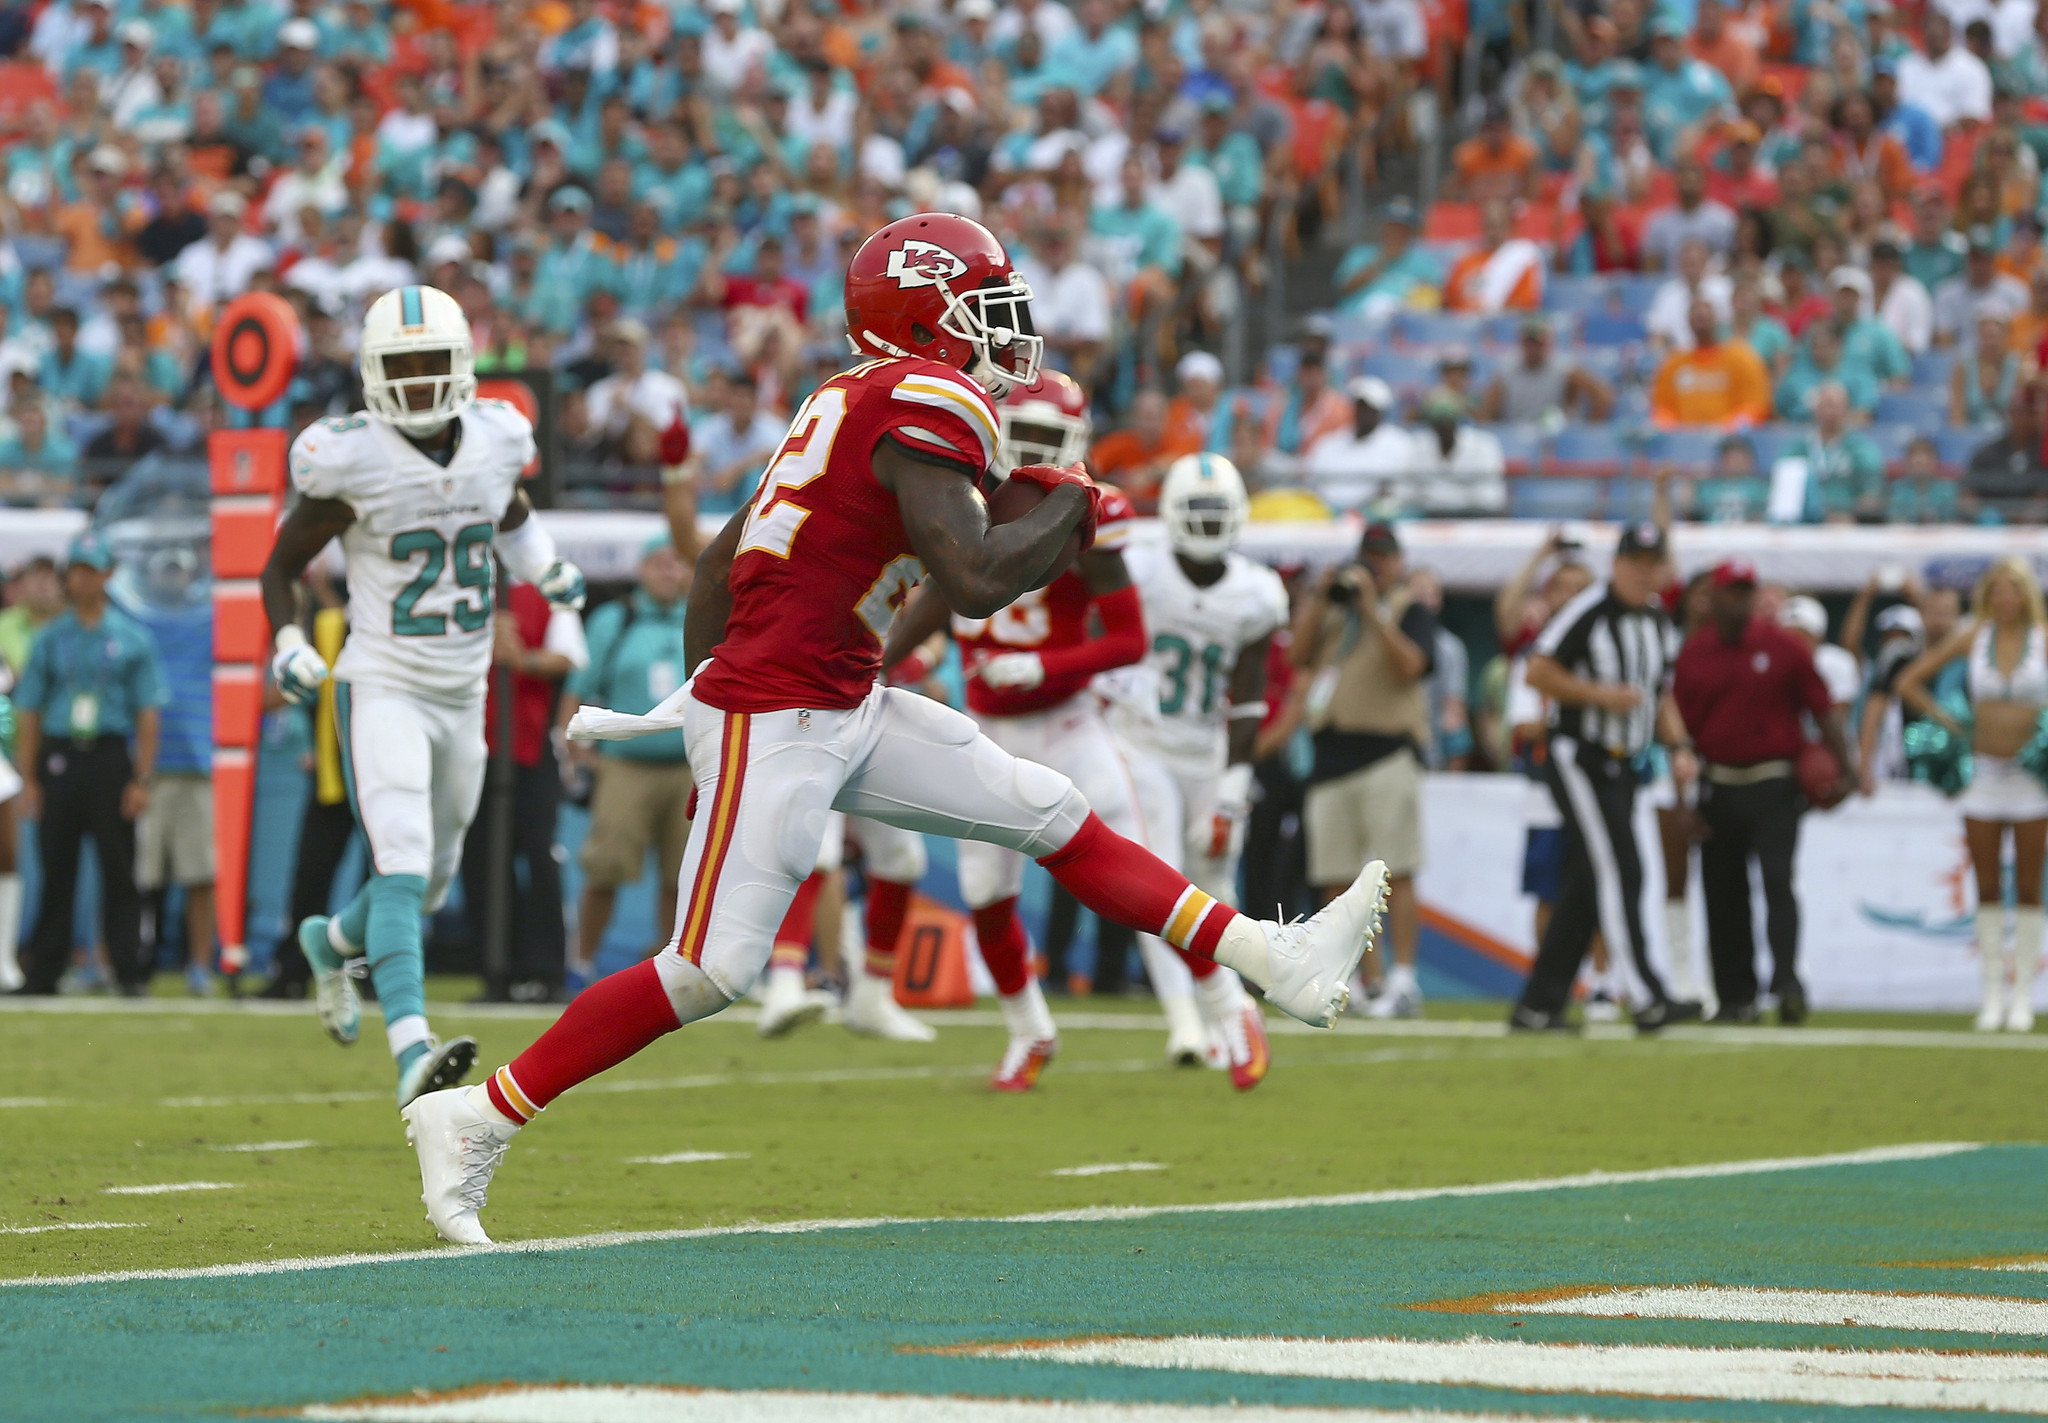 USC in the NFL: Joe McKnight makes impact for Chiefs - LA Times